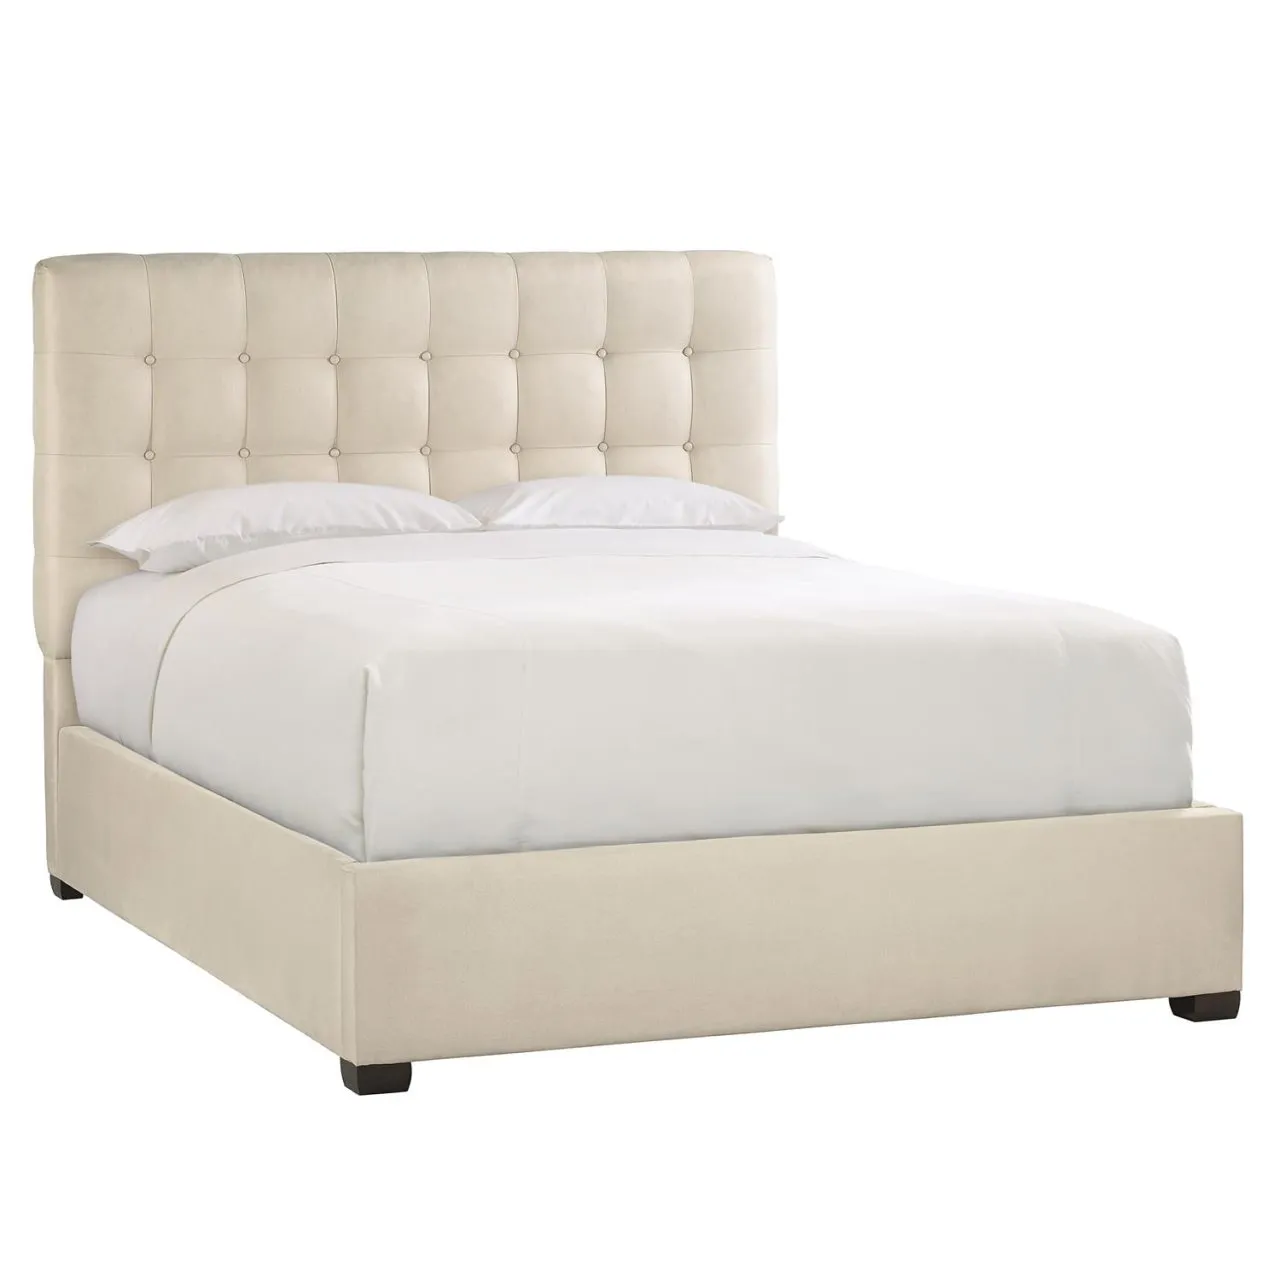 AVERY FABRIC PANEL BED TWIN